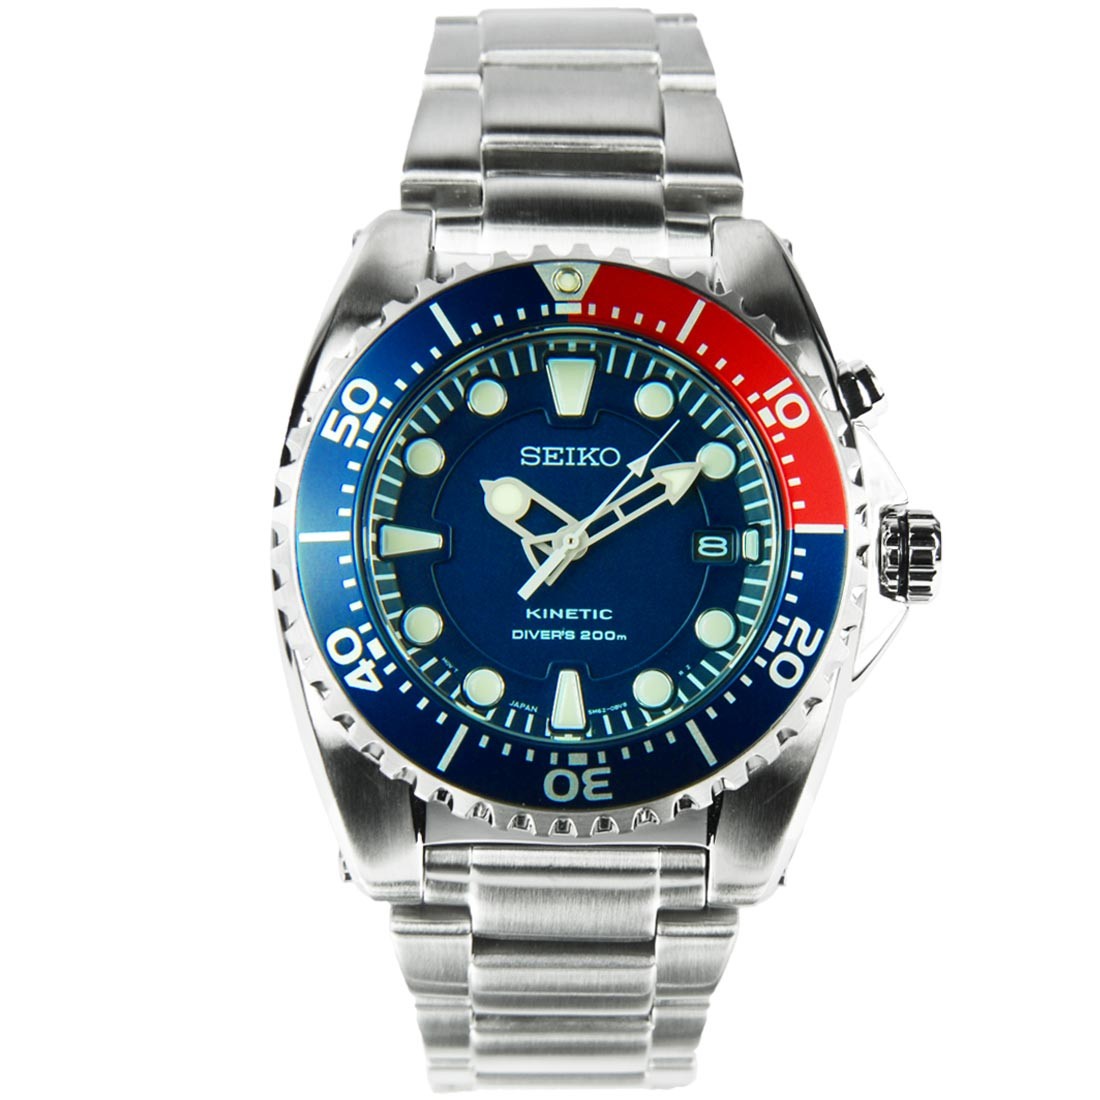 Gents Seiko Kinetic Stainless Steel Divers 200M Water Resistant Watch on Bracelet, with Date. Ref SKA369P1